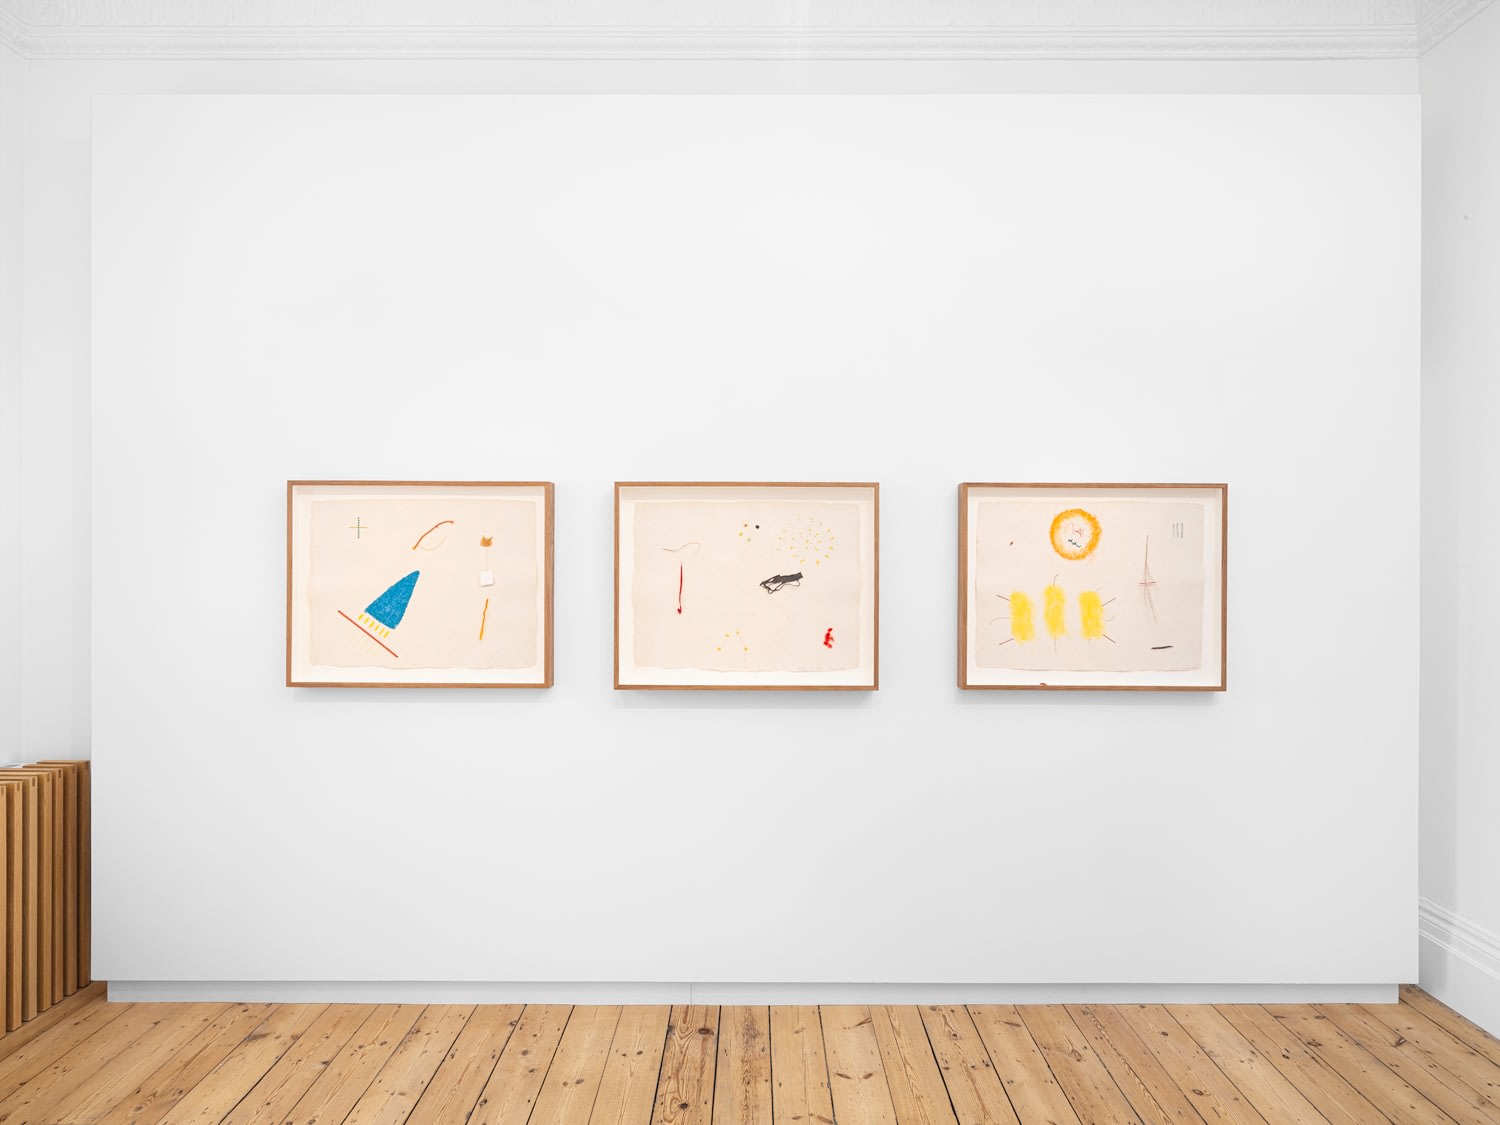 Cecilia Vicu&ntilde;a in London, 1972 and Today, Installation View